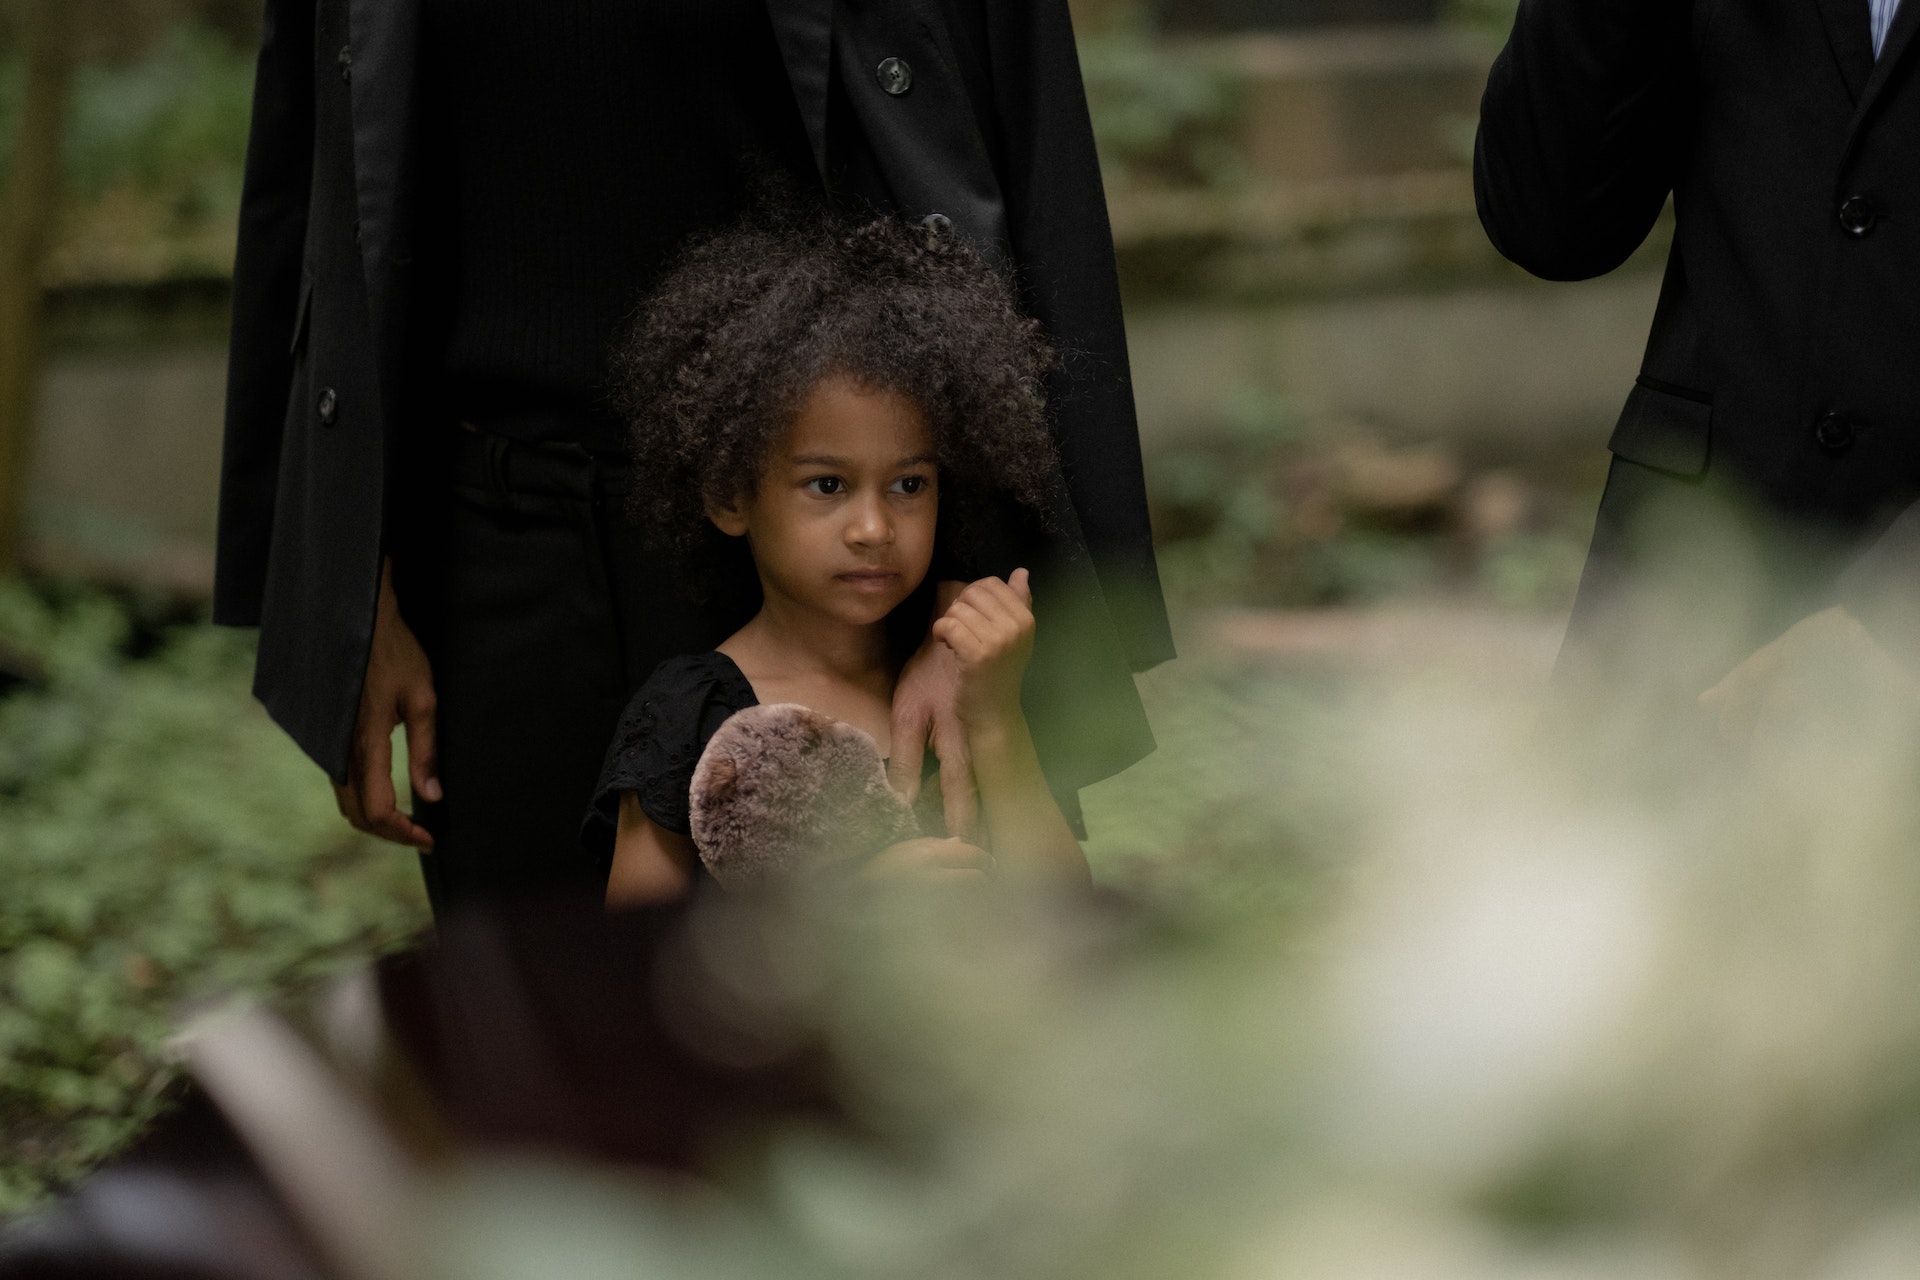 A girl at a funeral | Source: Pexels